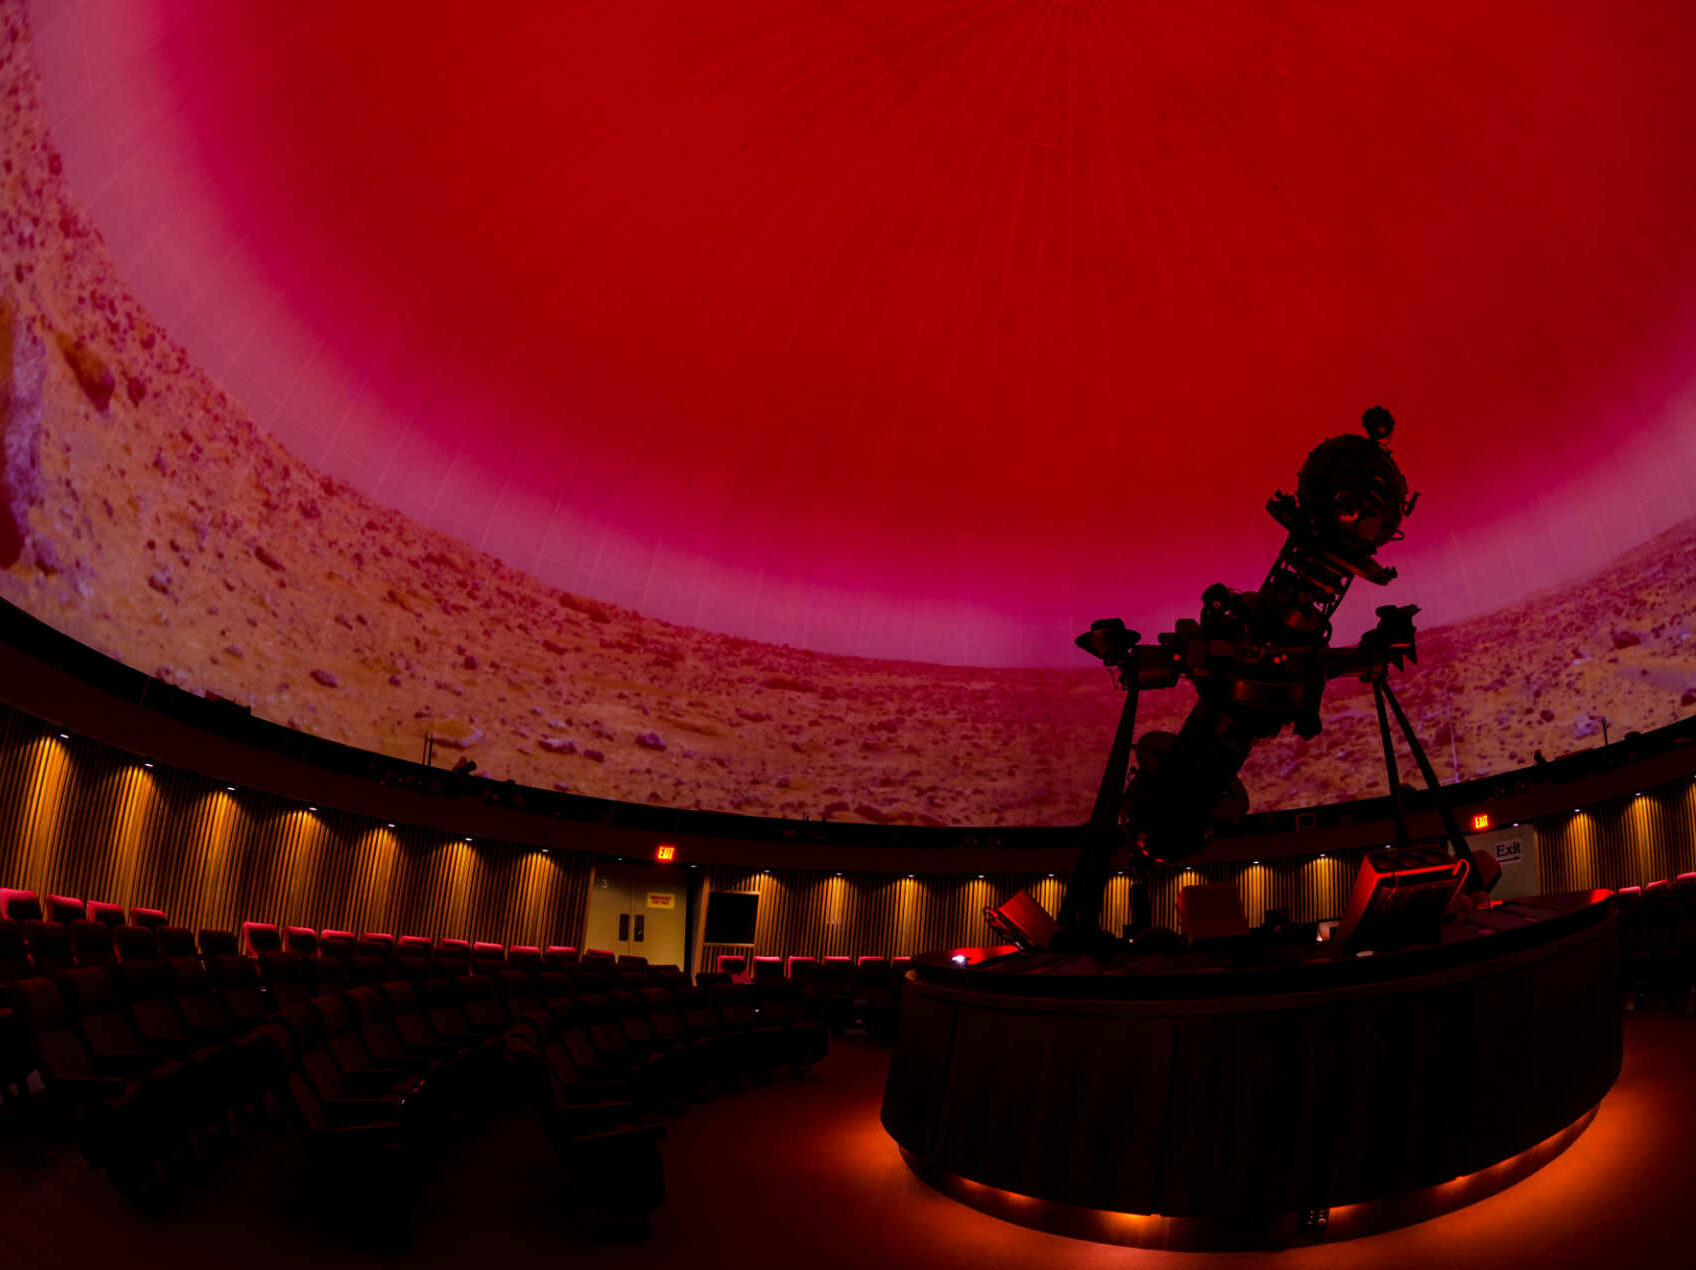 Interior shot of the Planetarium showing seating and Marvin with a the red sky and landscape of Mars being projected on the dome.